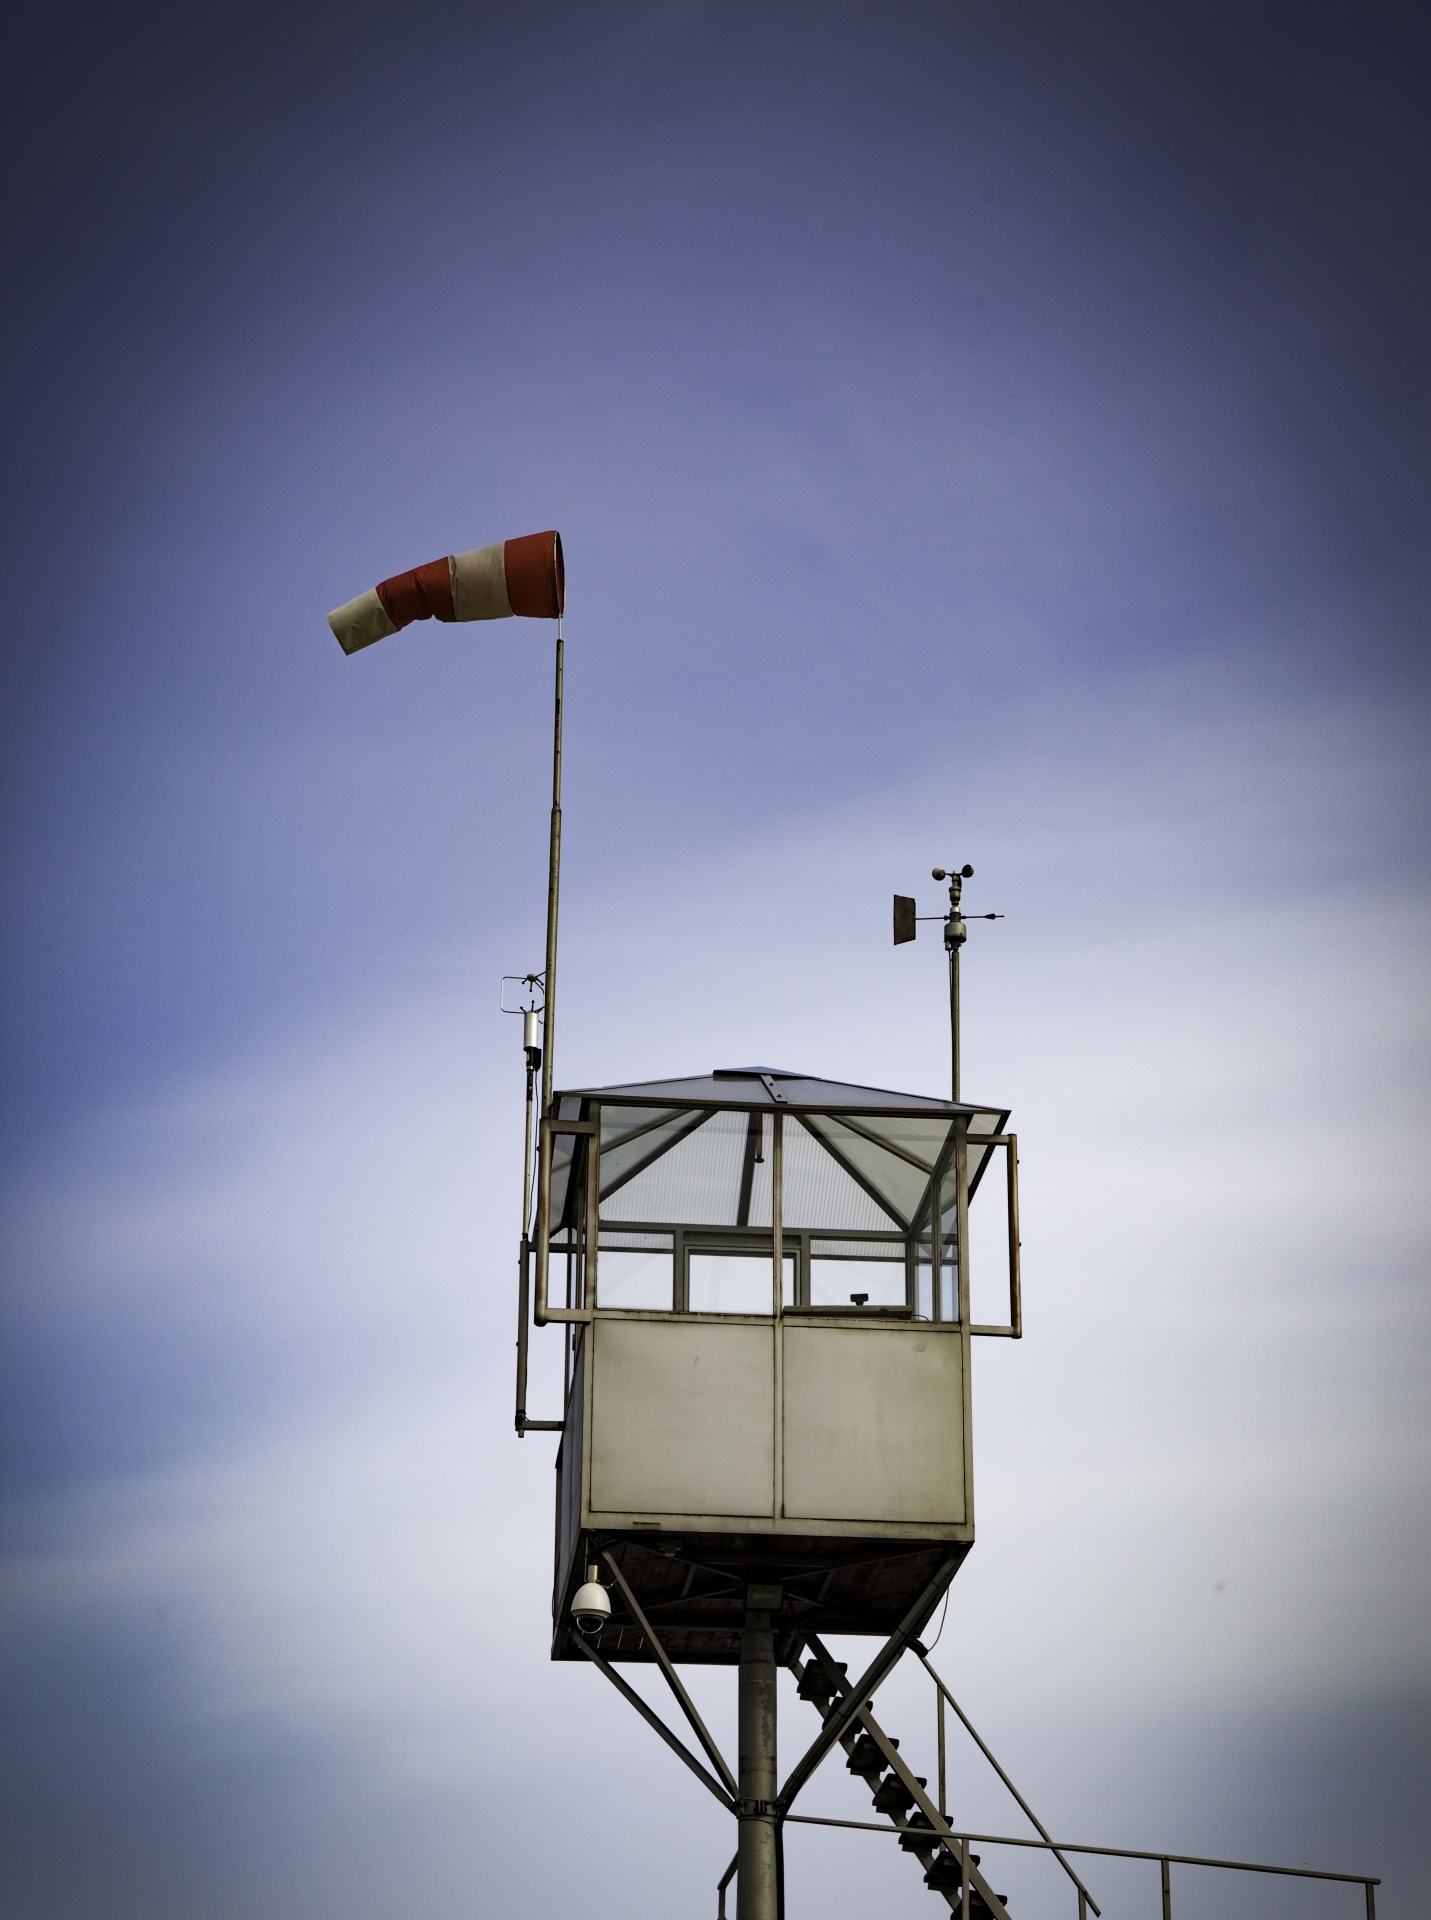 Windsock at the airport